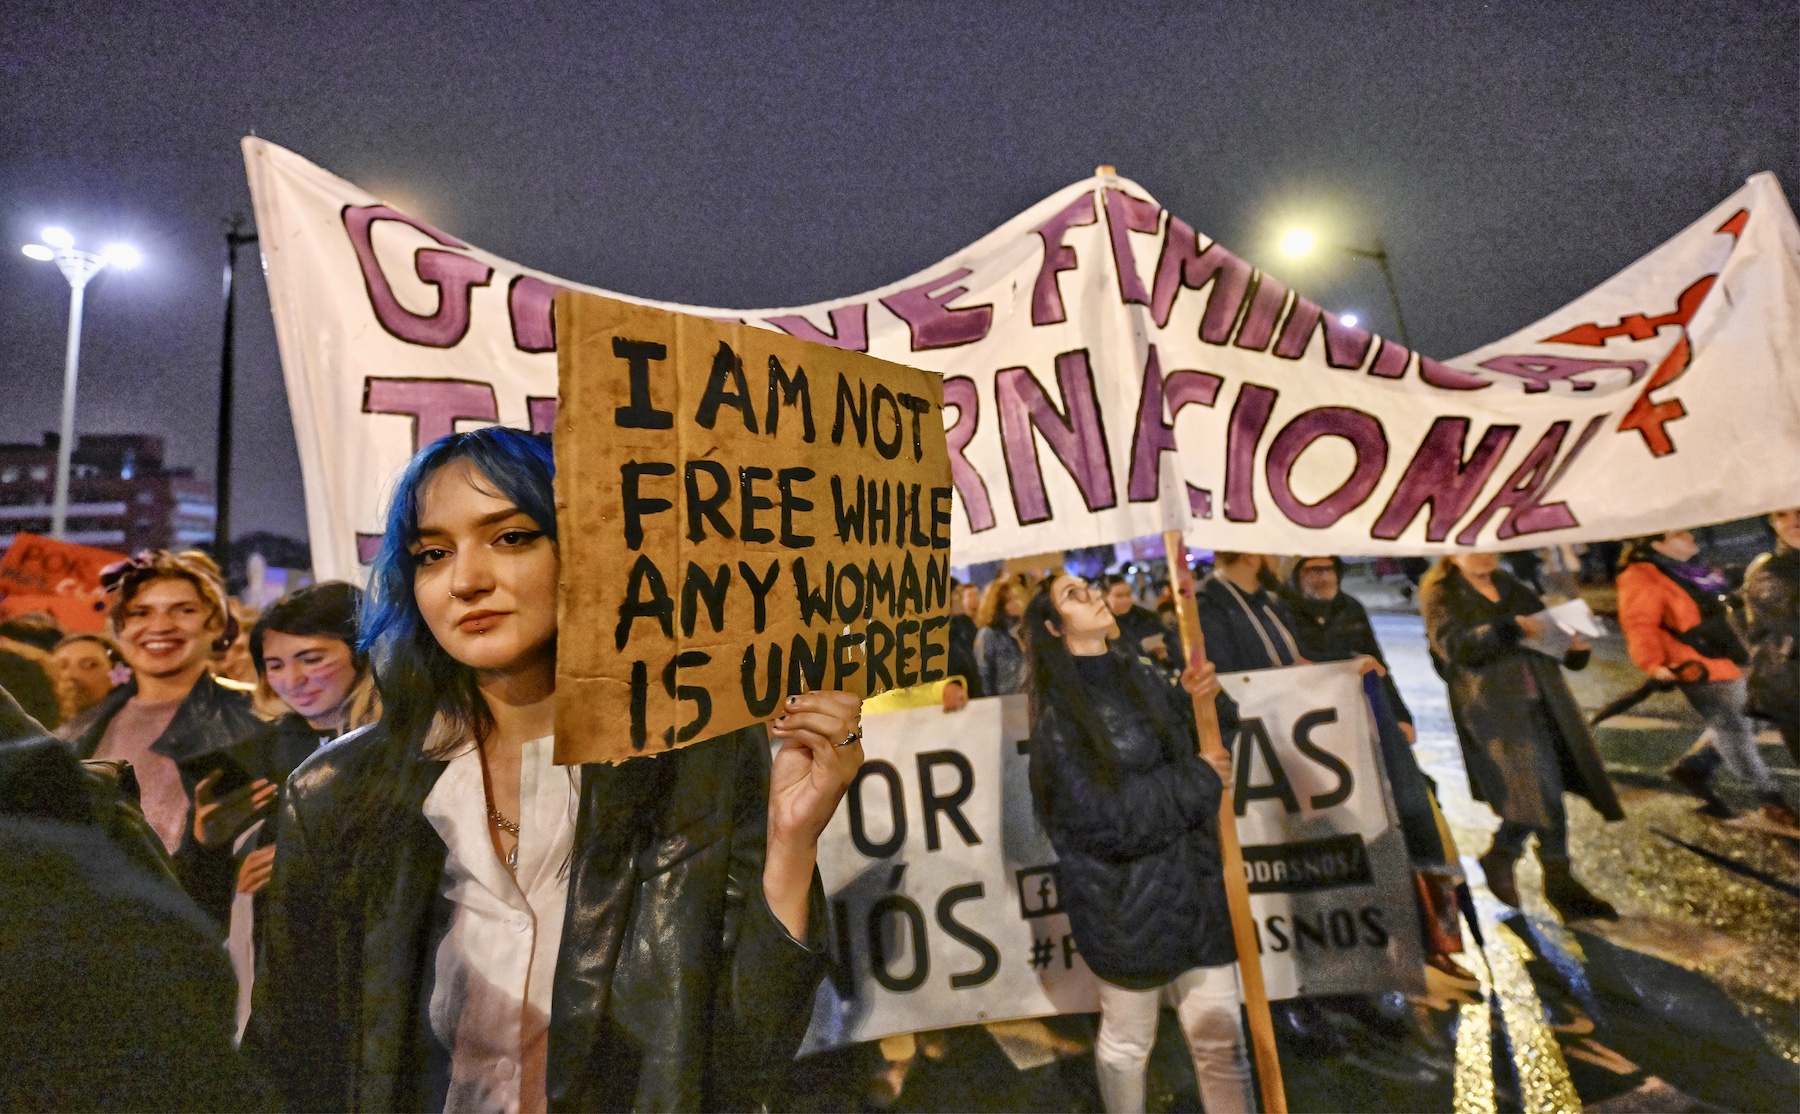 A woman with blue hair holds up a cardboard sign that says, "I am not free while any women is unfree". 